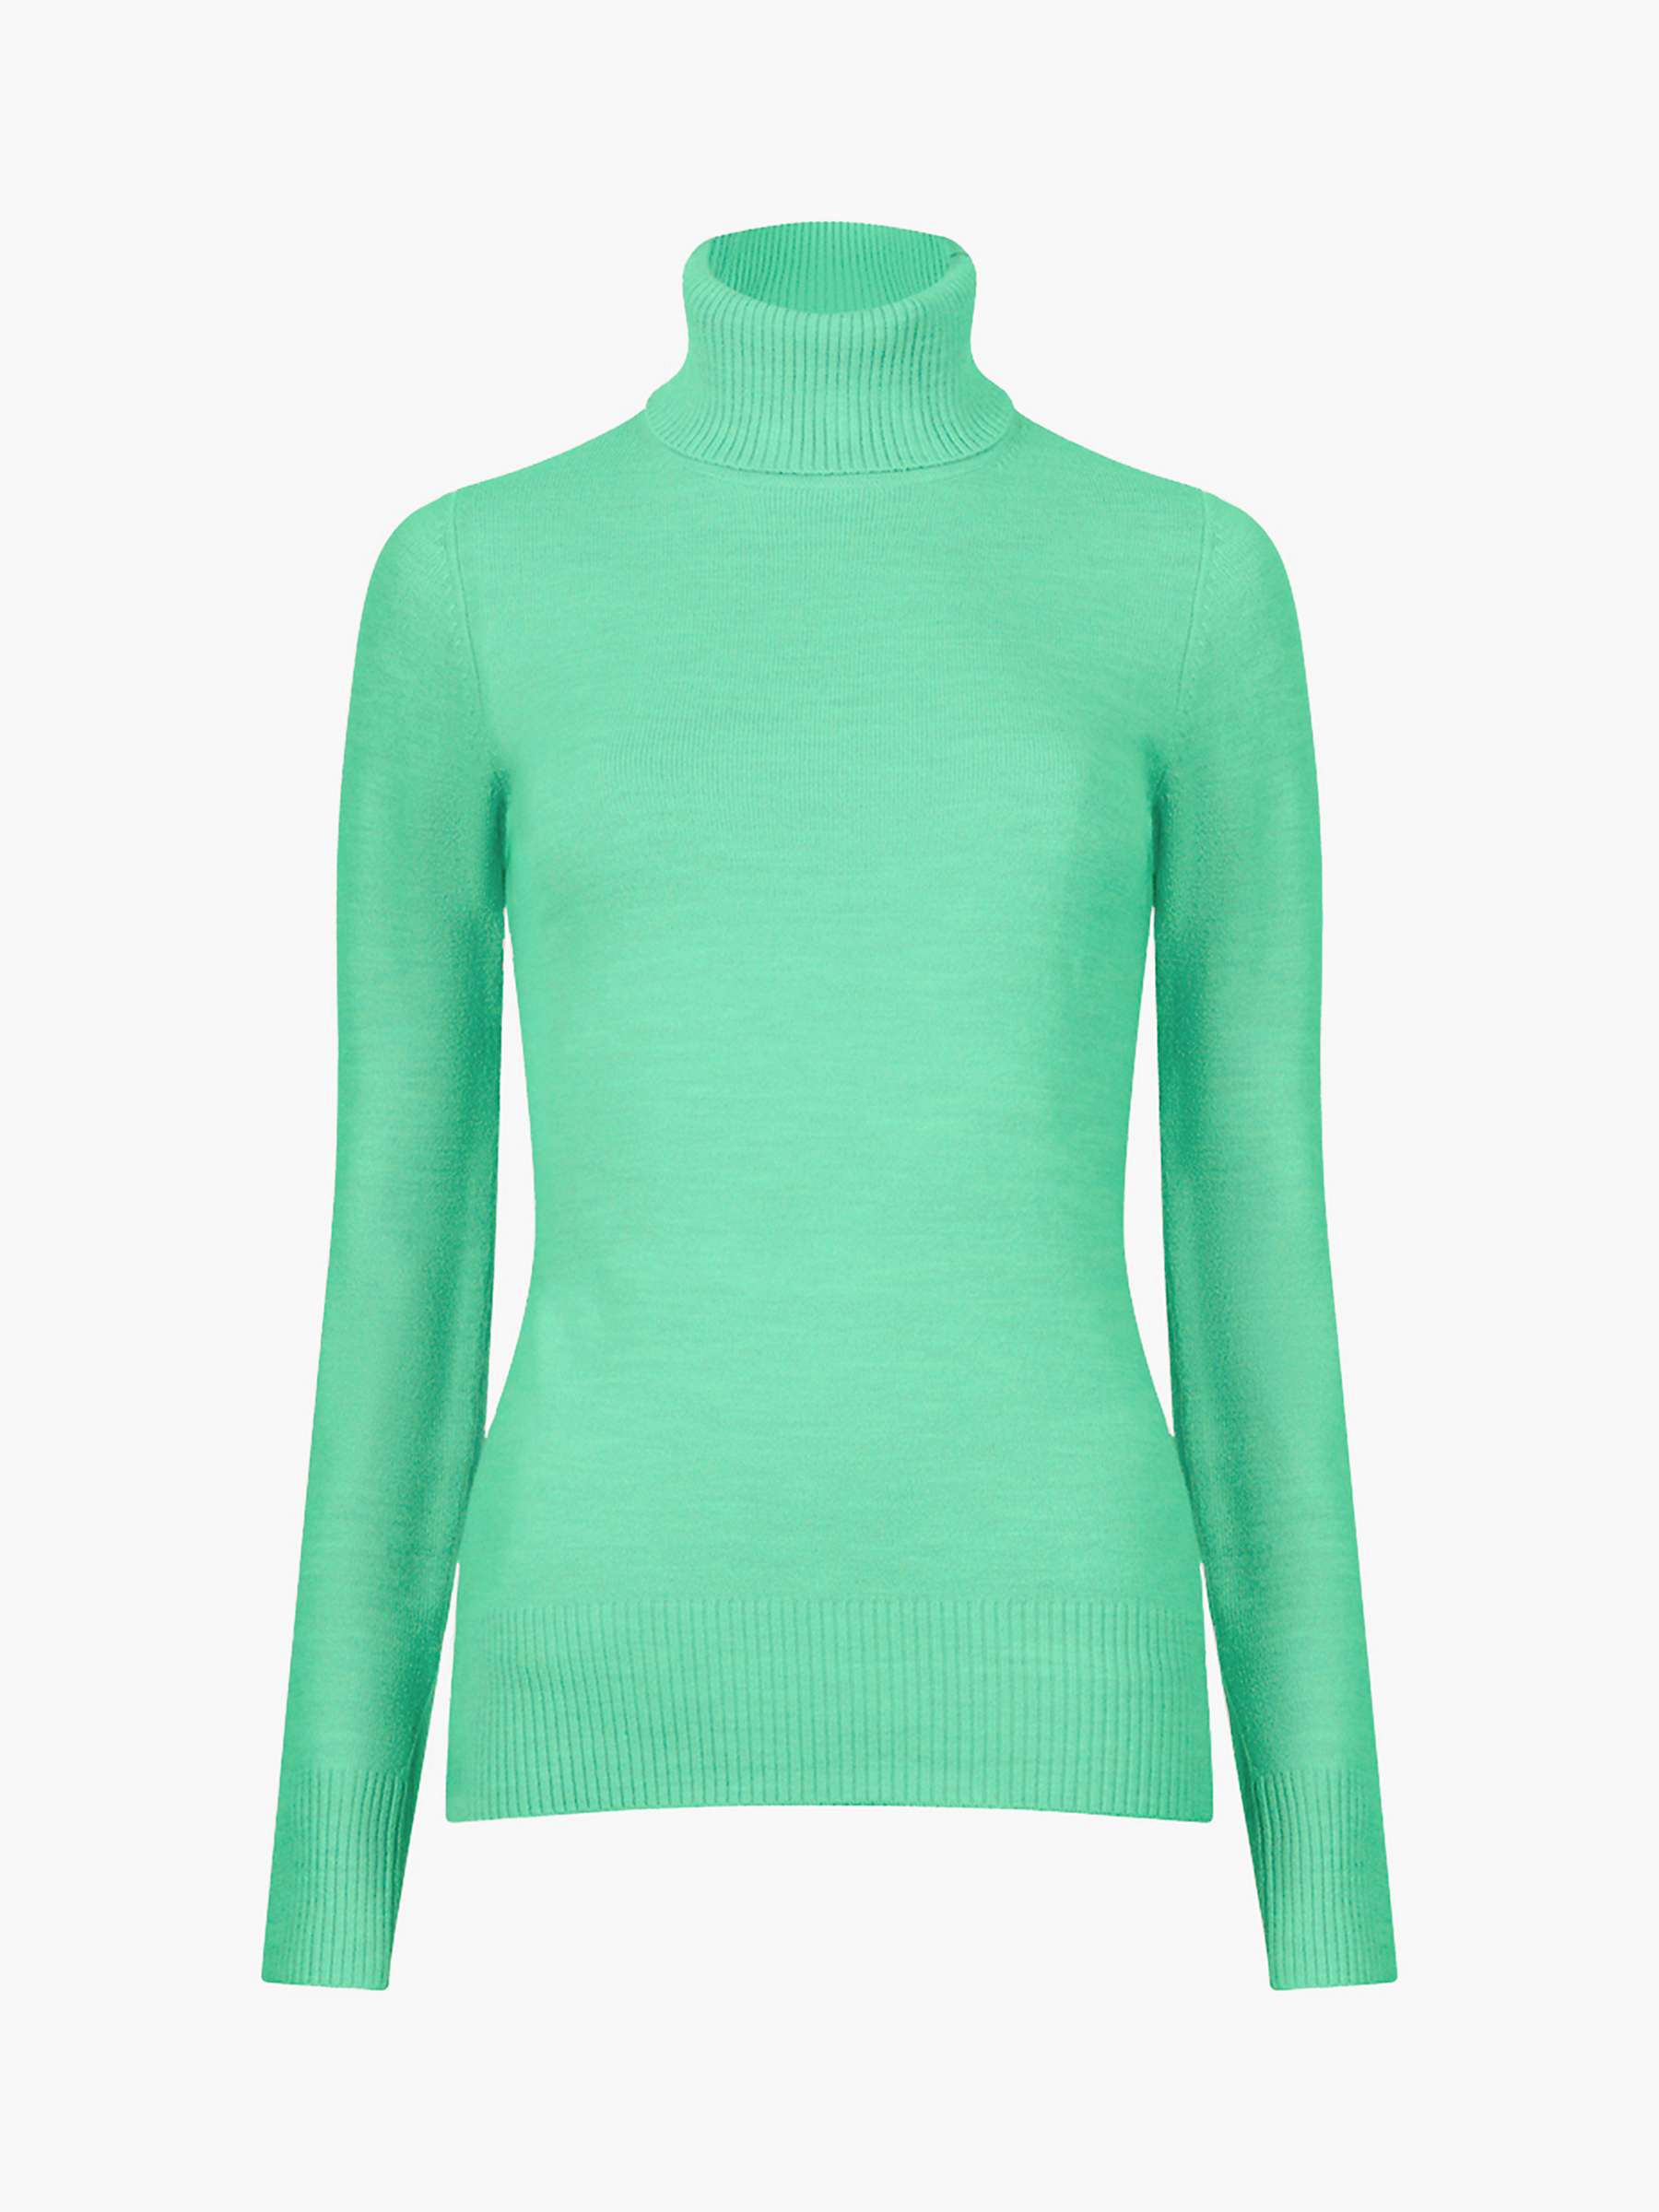 Buy French Connection Babysoft Ribbed Roll Neck Jumper Online at johnlewis.com